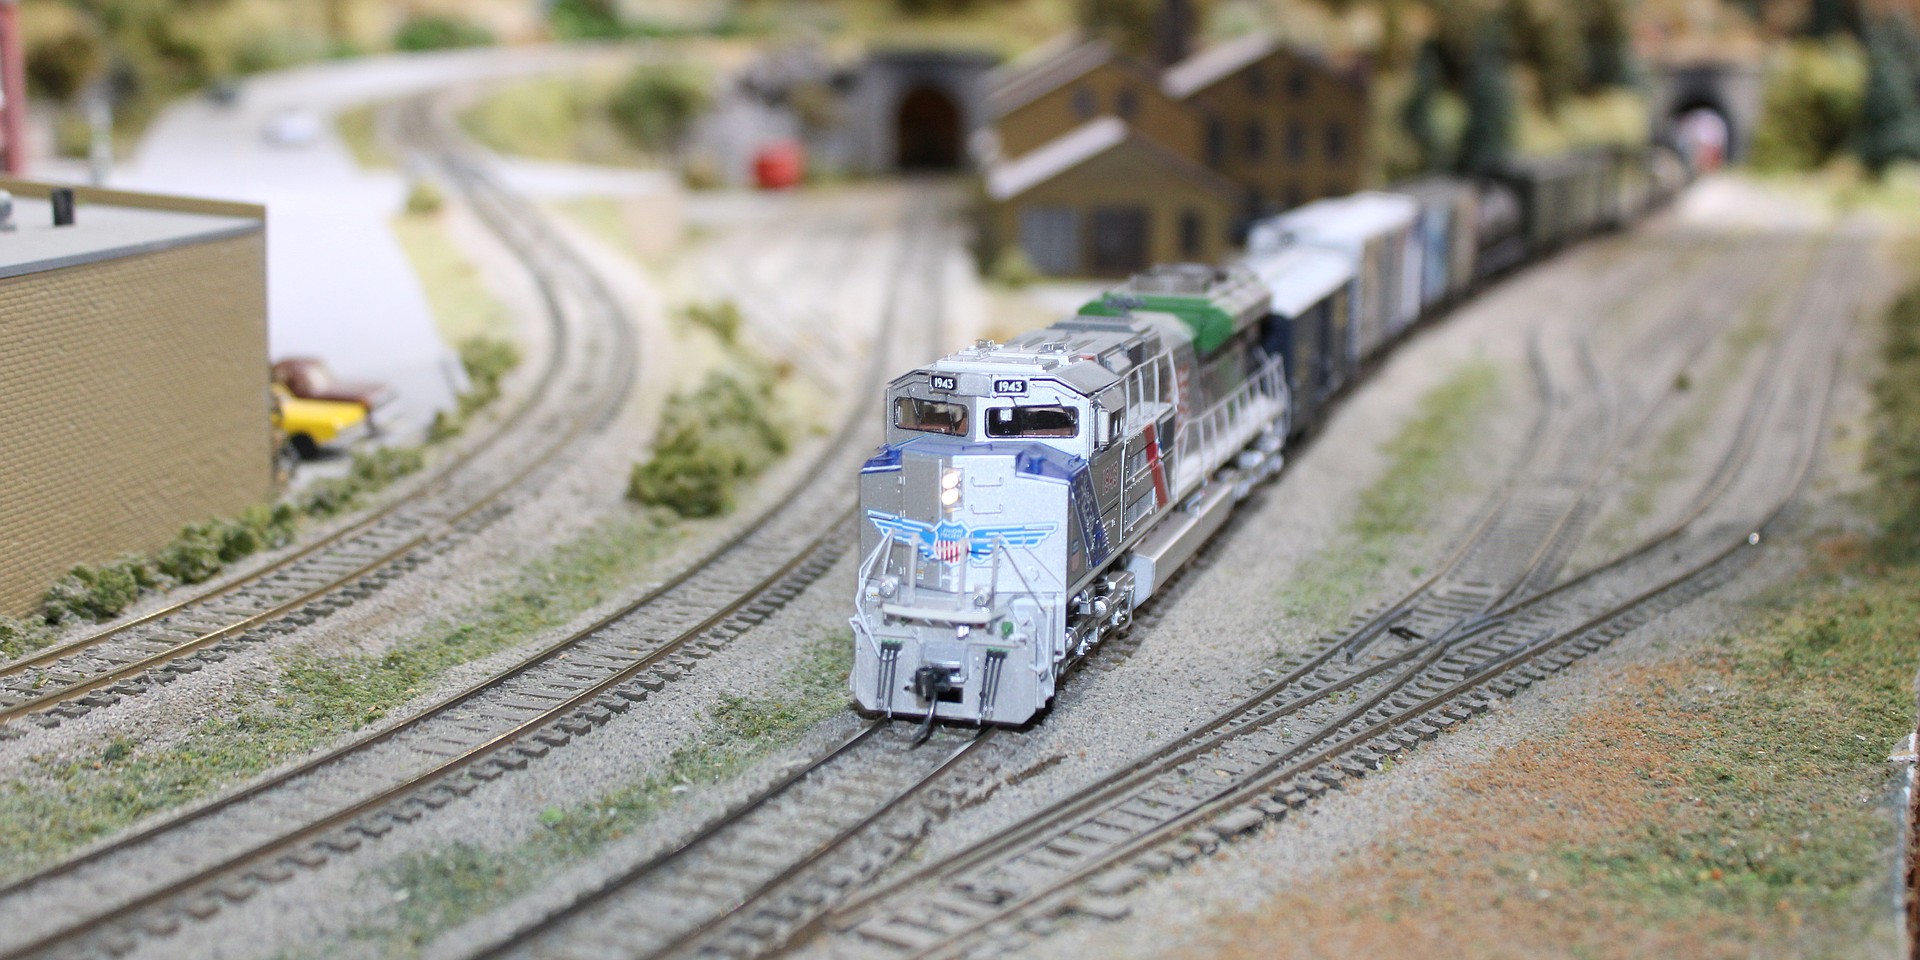 The model train layout that is headed to 17th Street in Sarasota previously was displayed in Vermont.